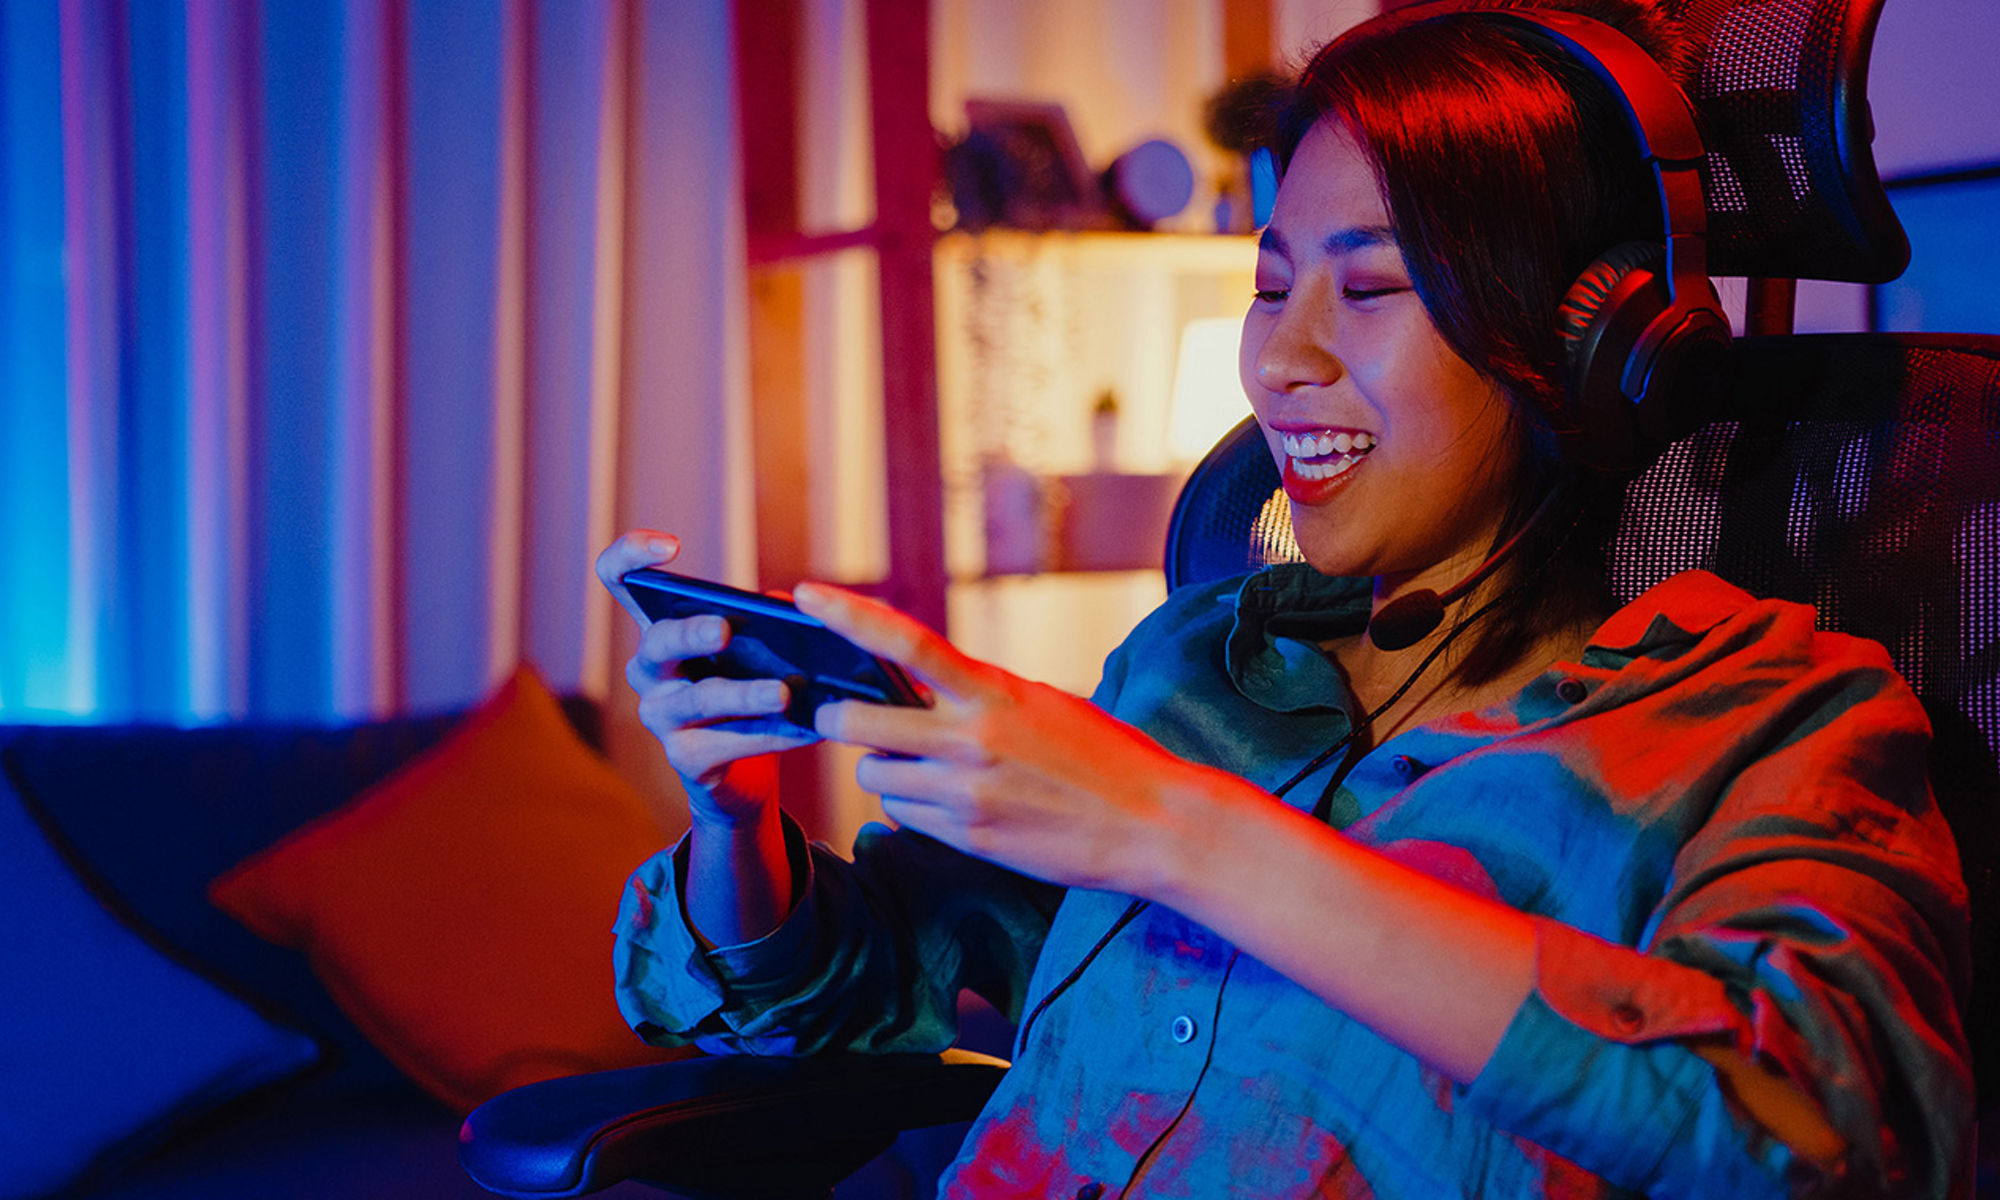 A girl gaming on her cellphone